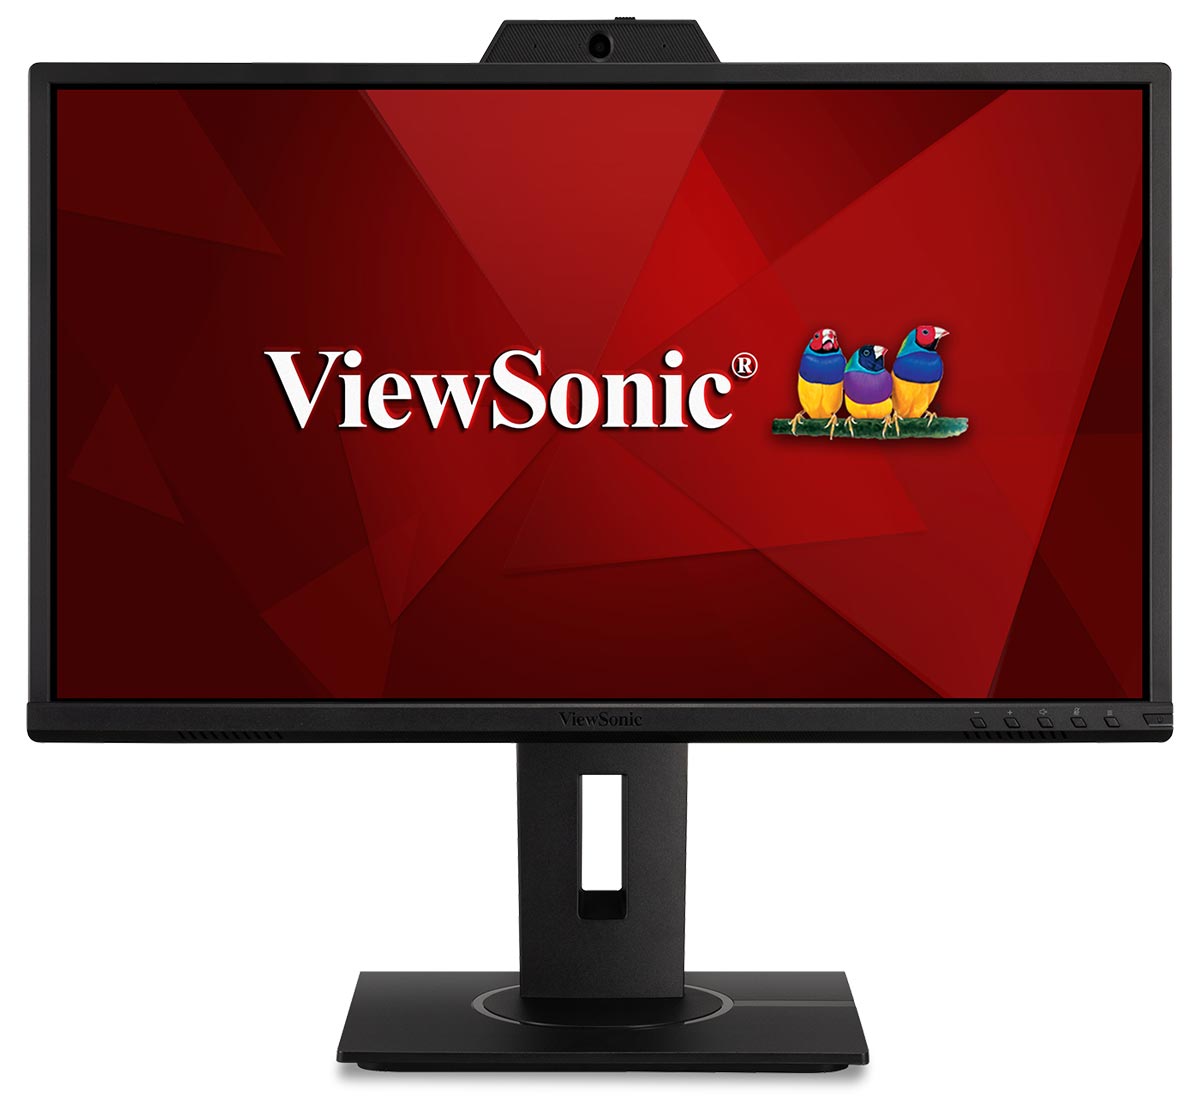 The ViewSonic VG2440v 24-inch video conferencing monitor with built-in webcam